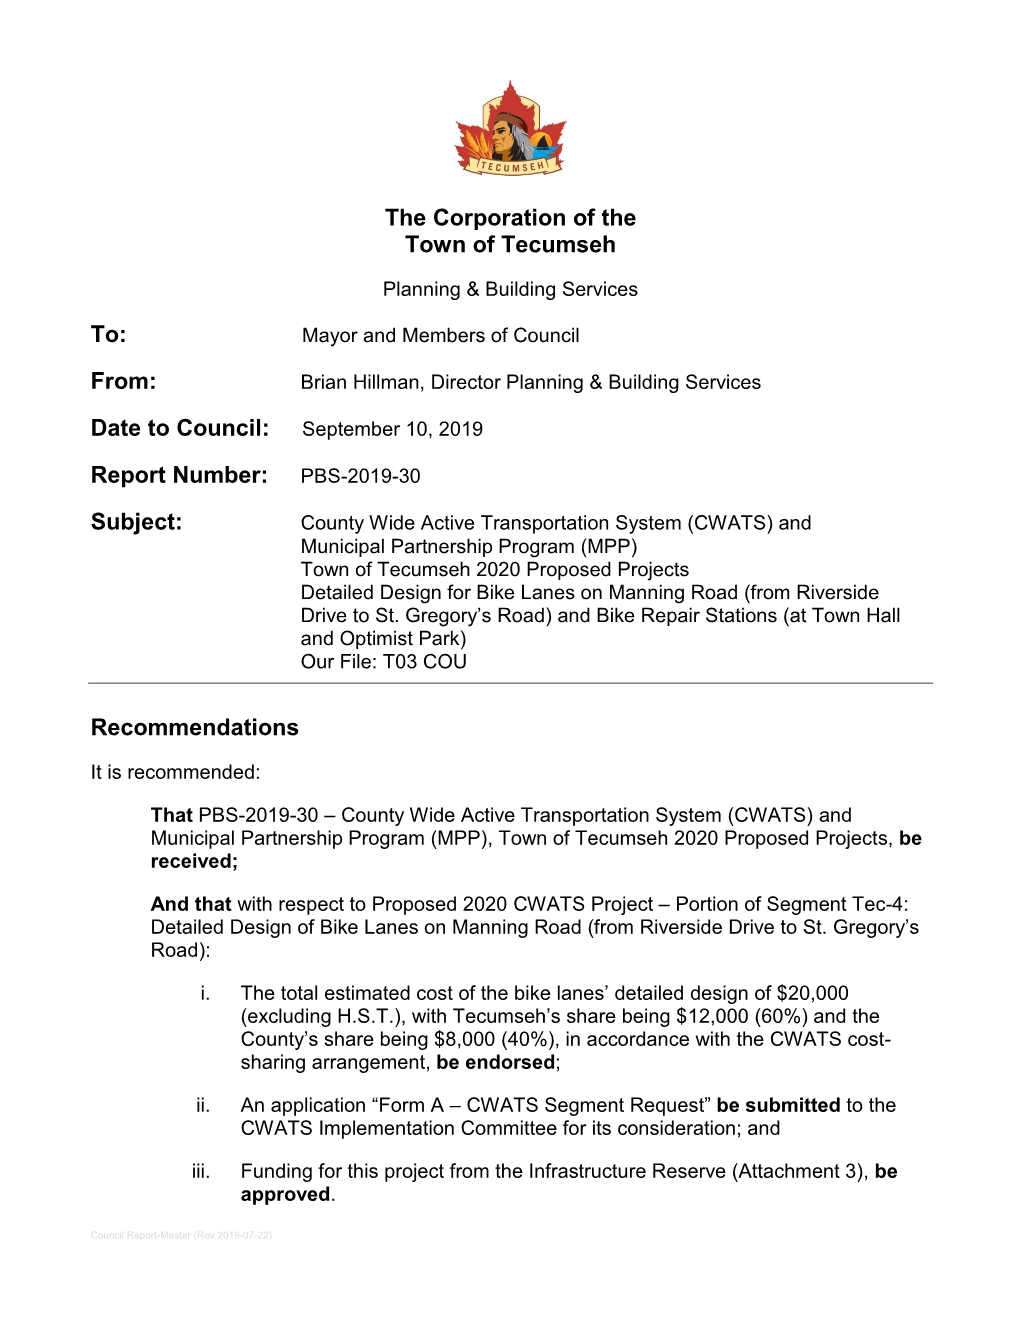 Date to Council: Report Number: PBS-2019-30 Subject